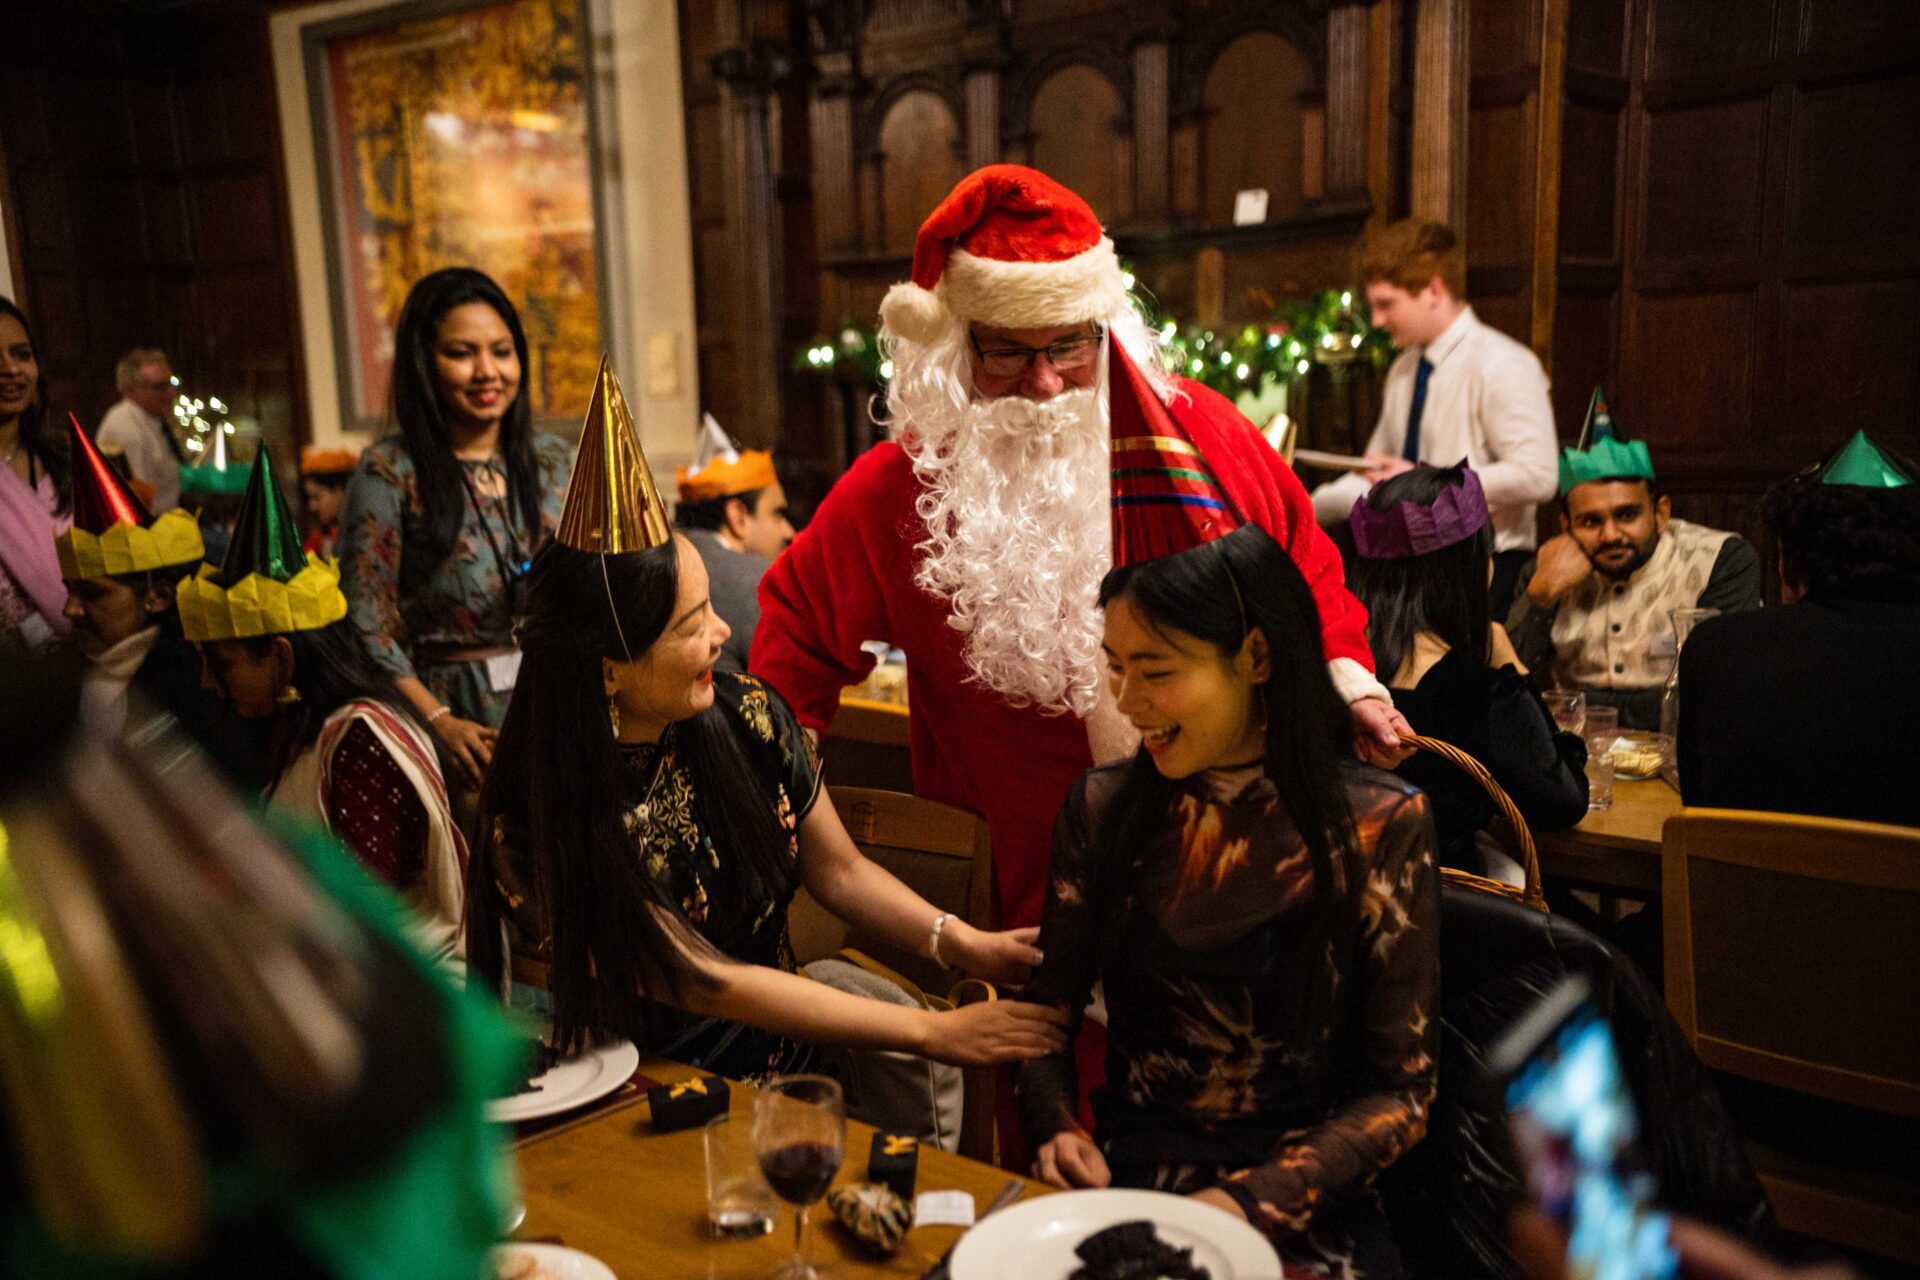 Delegates meeting Father Christmas at the Cumberland Lodge Christmas Conference 2022.